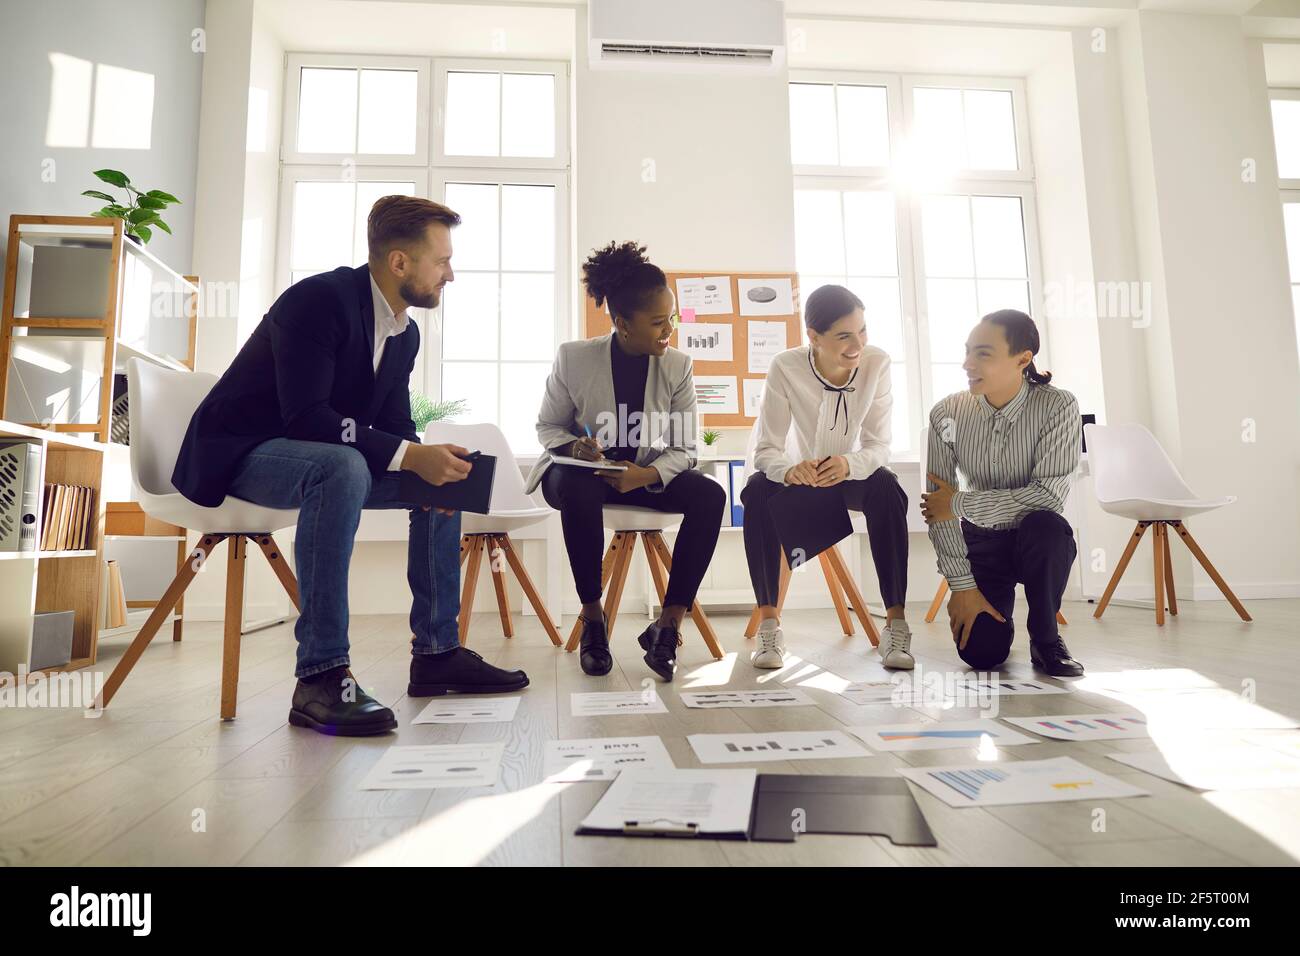 Team of young business professionals developing new strategies in an office meeting Stock Photo